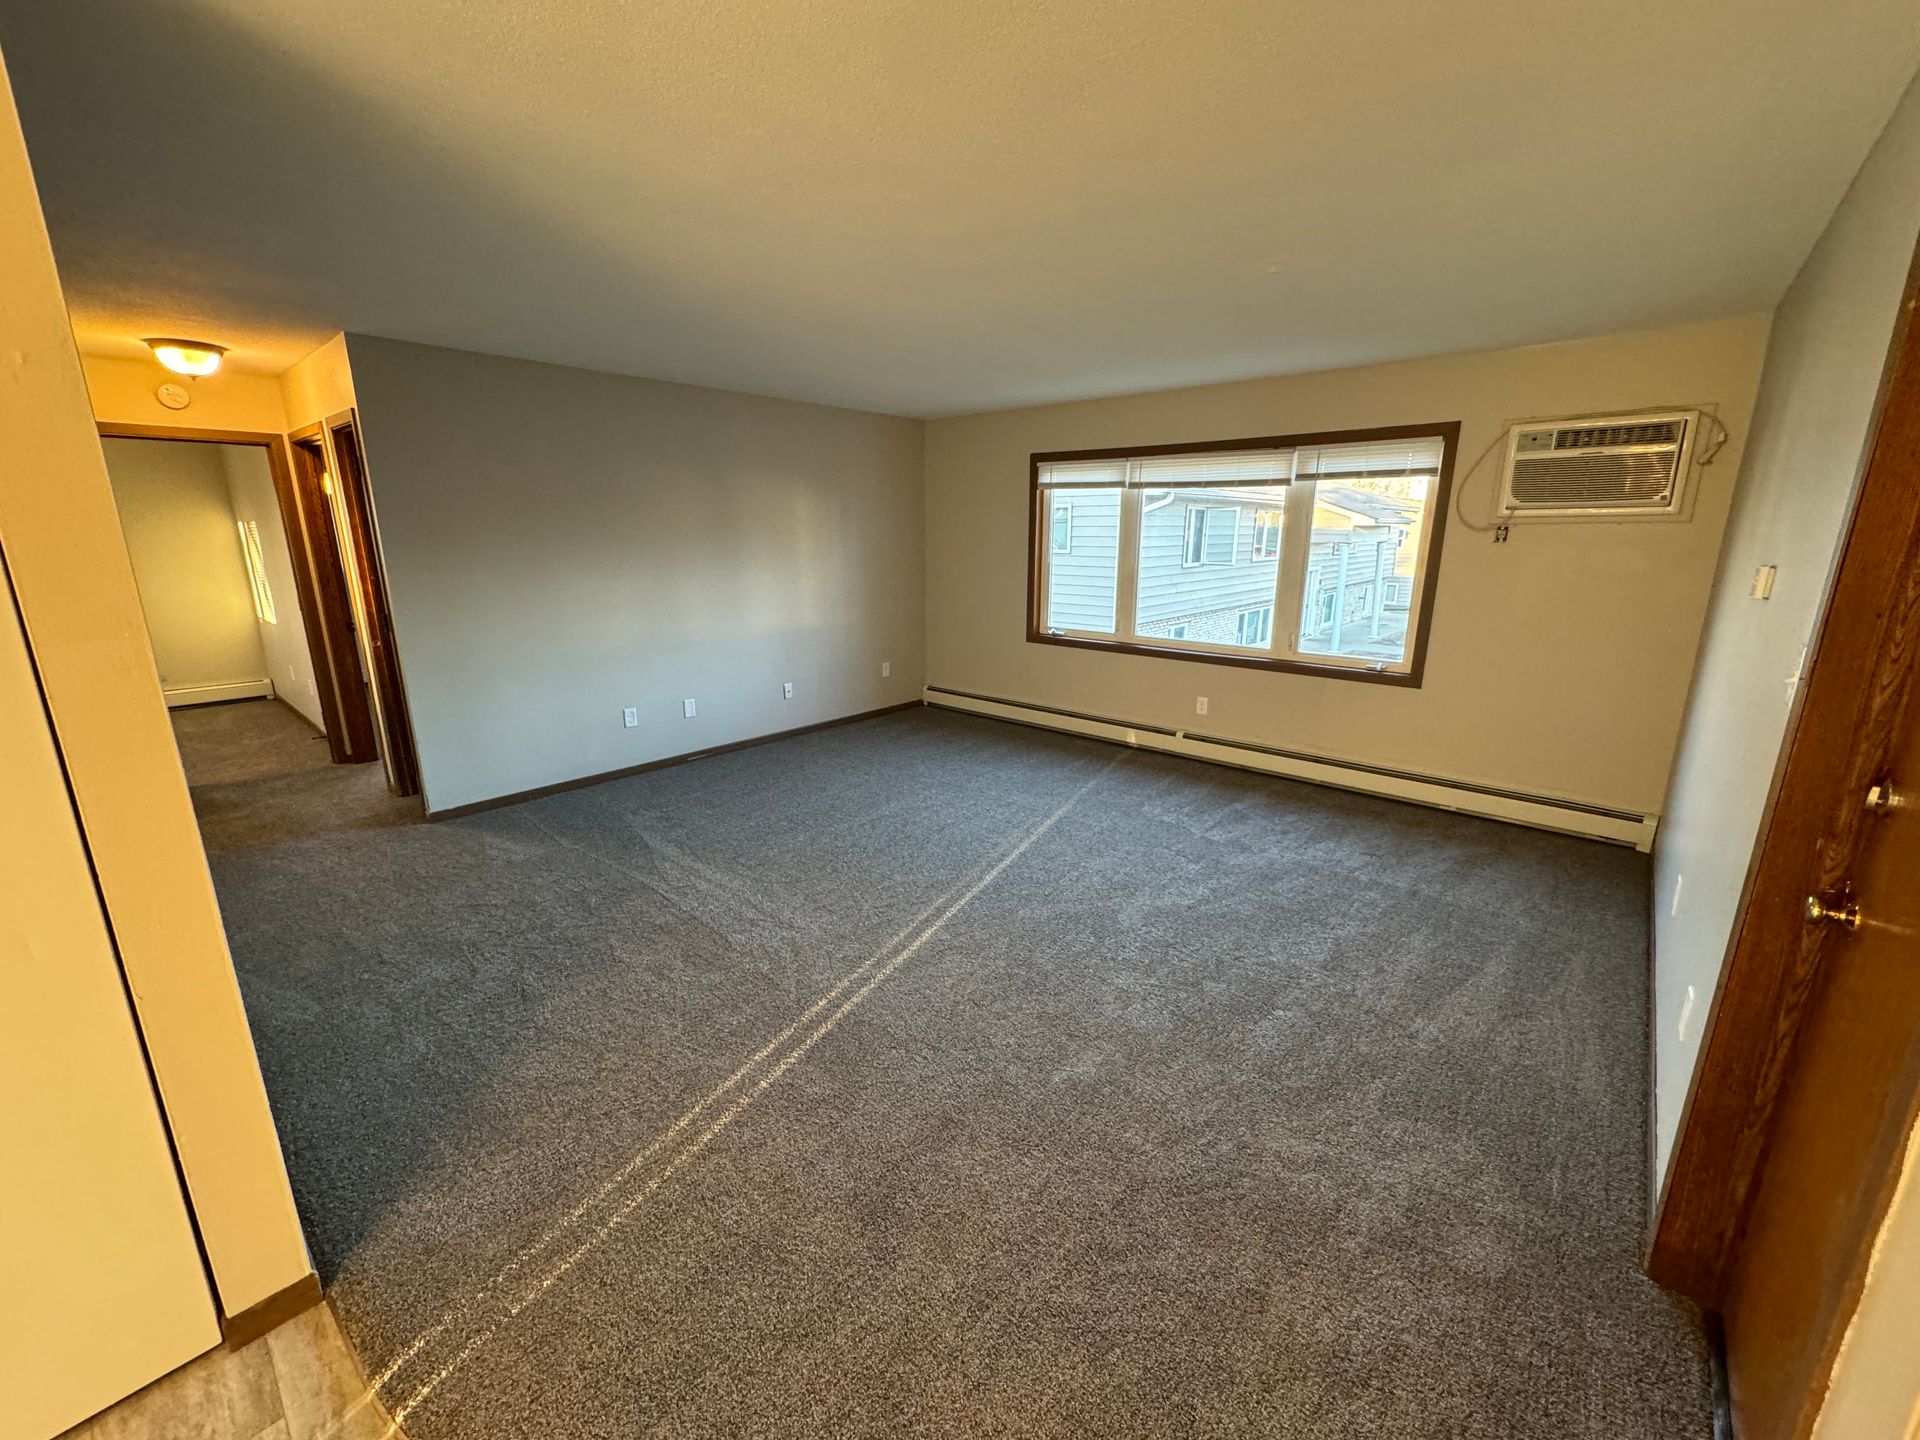 An empty living room with a carpeted floor and a window.